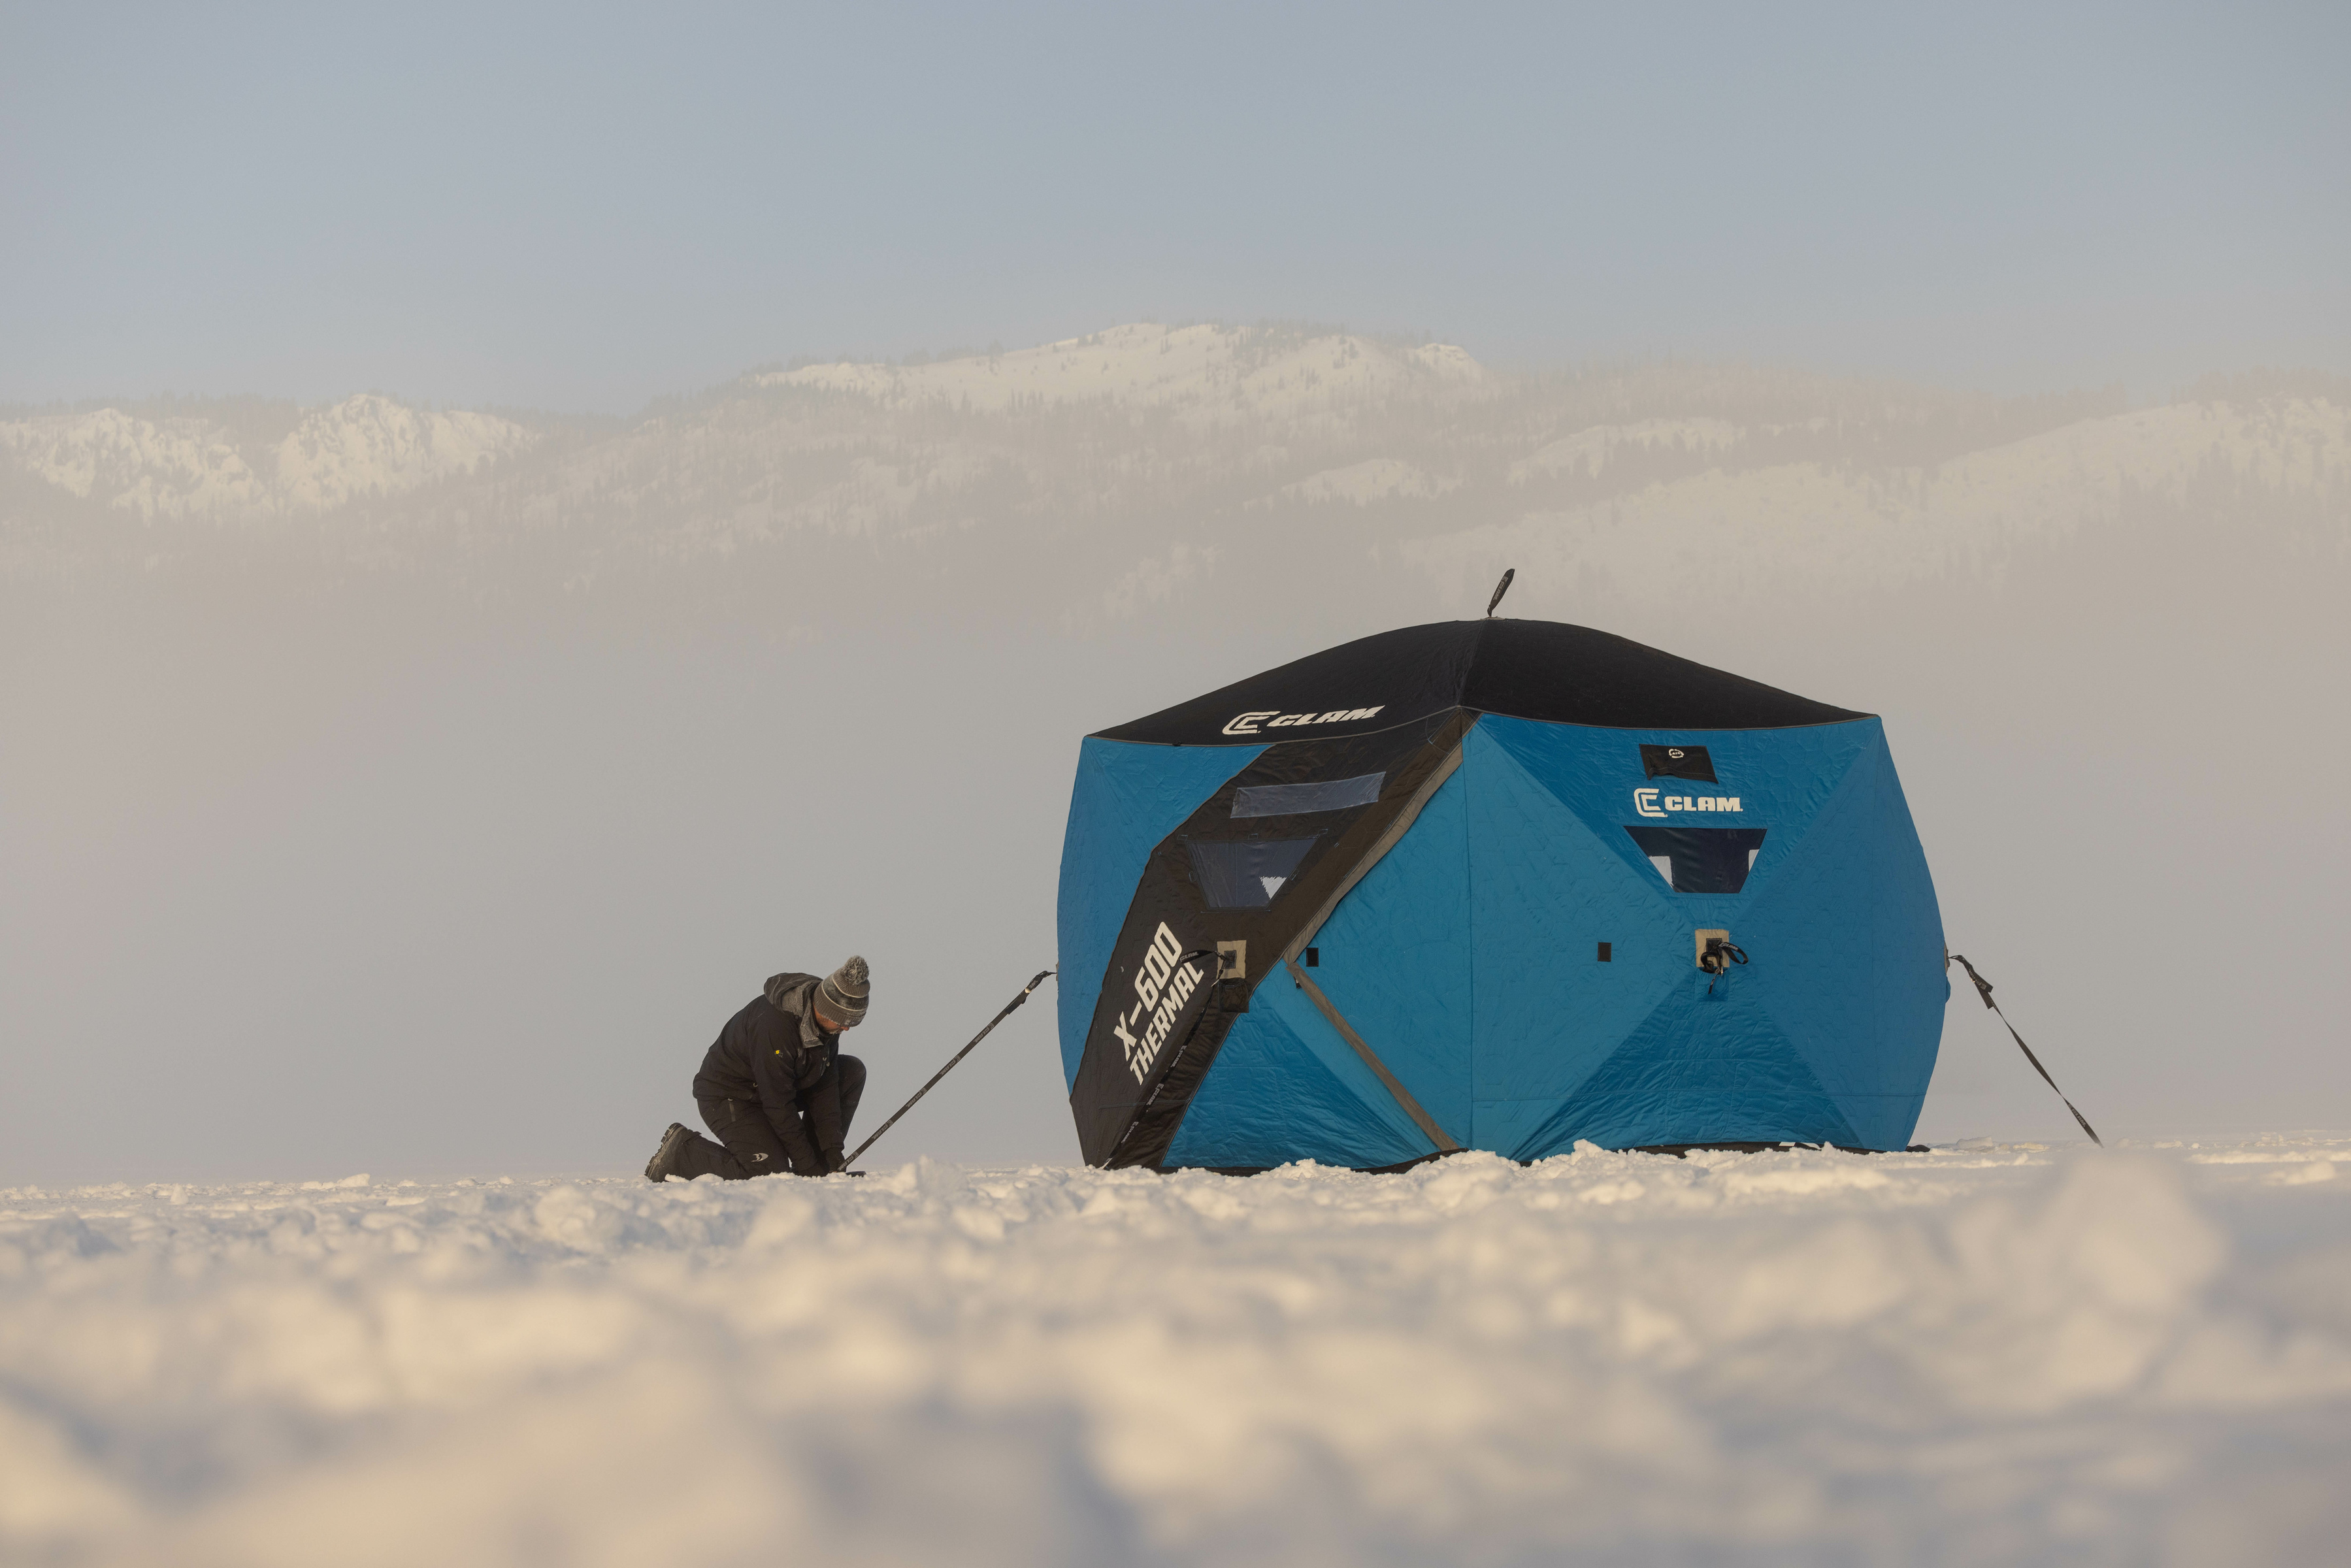 Clam Outdoors X-400 Thermal Ice Team Ice Fishing Shelter